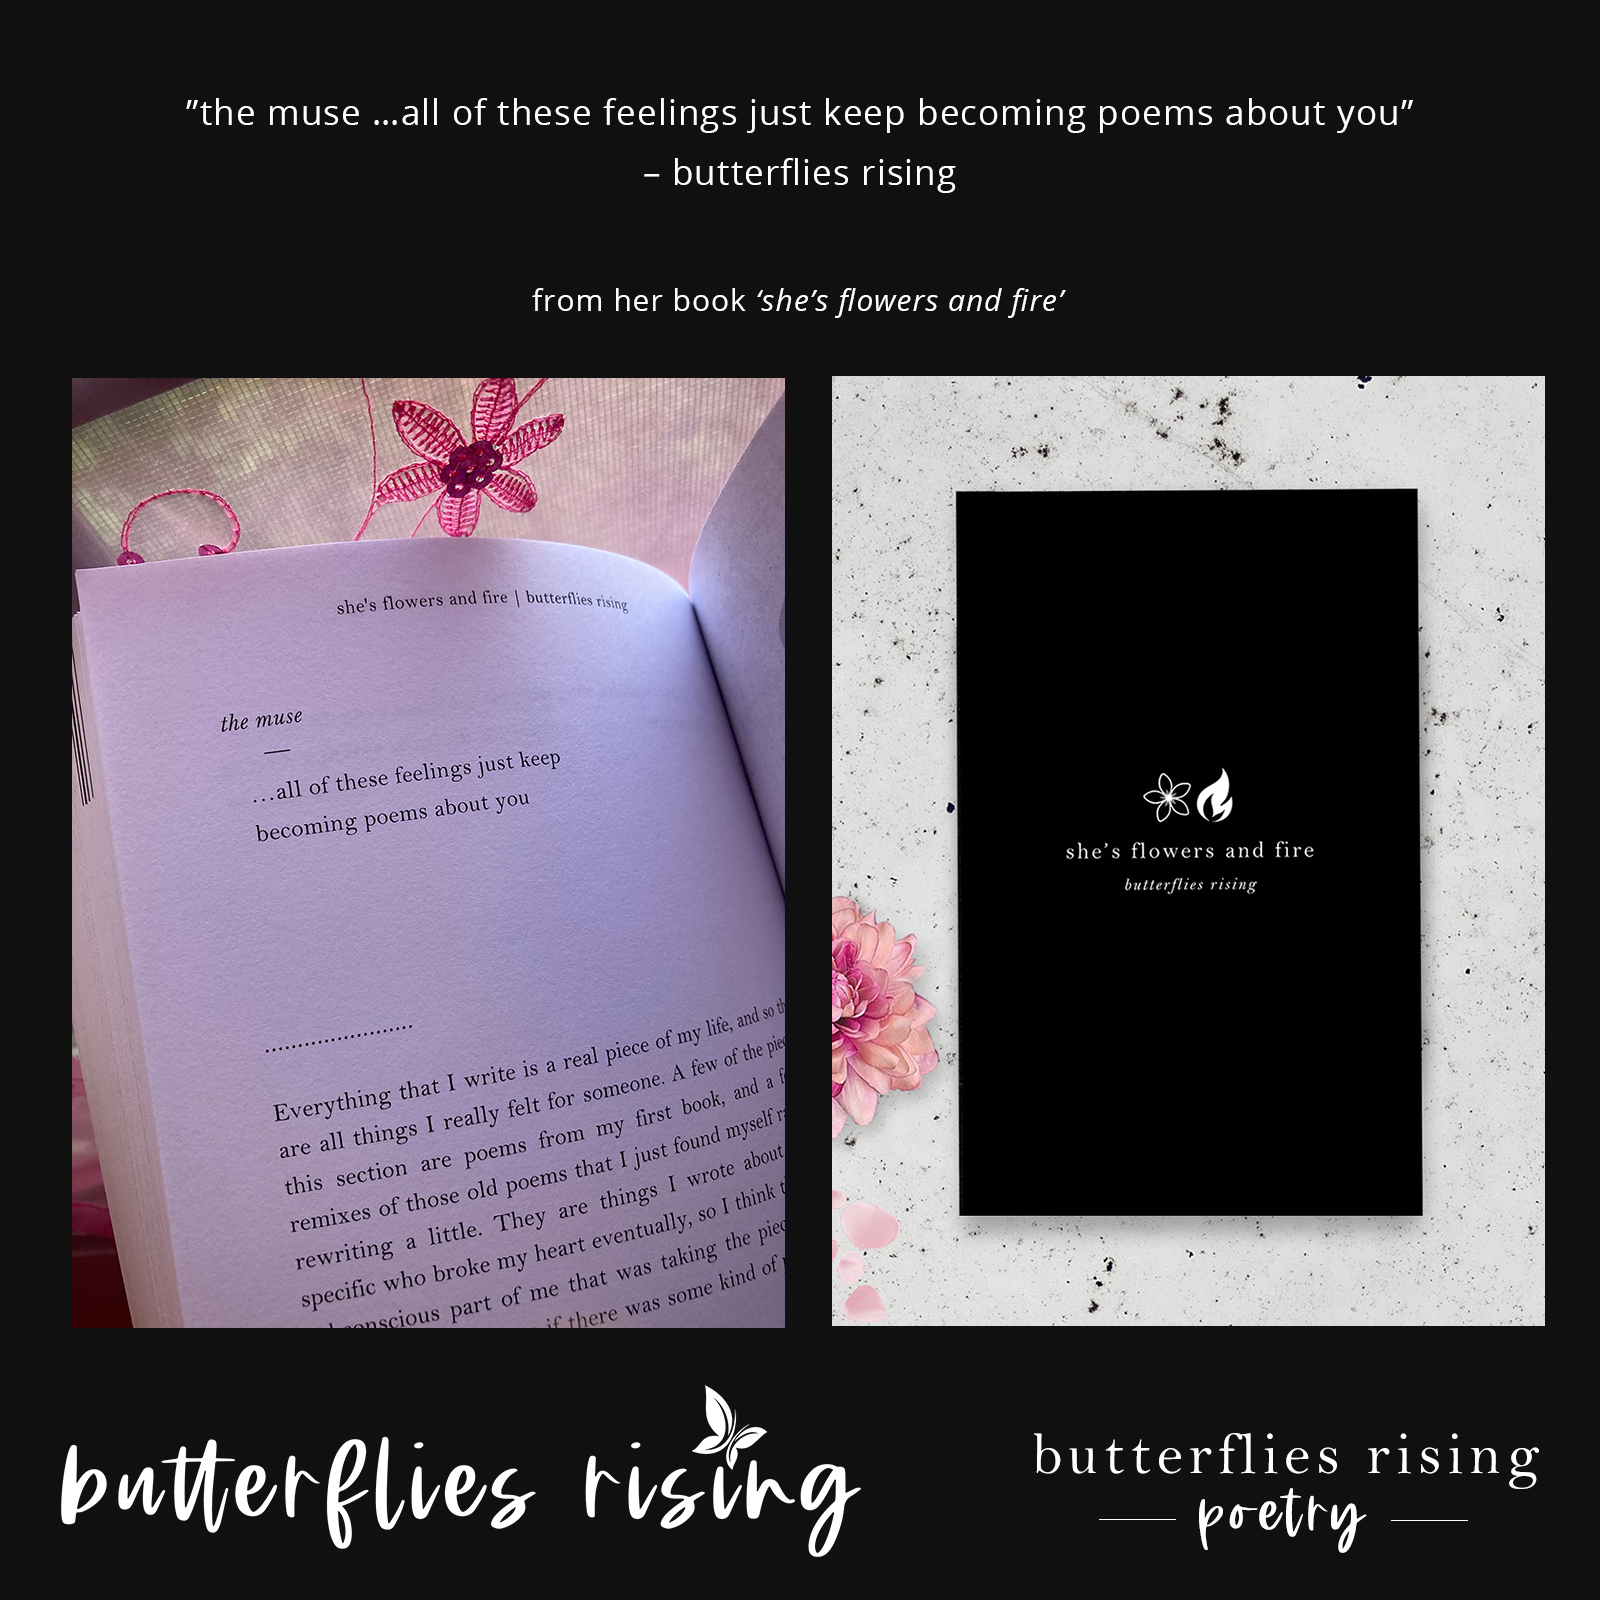 ...all of these feelings just keep becoming poems about you - butterflies rising